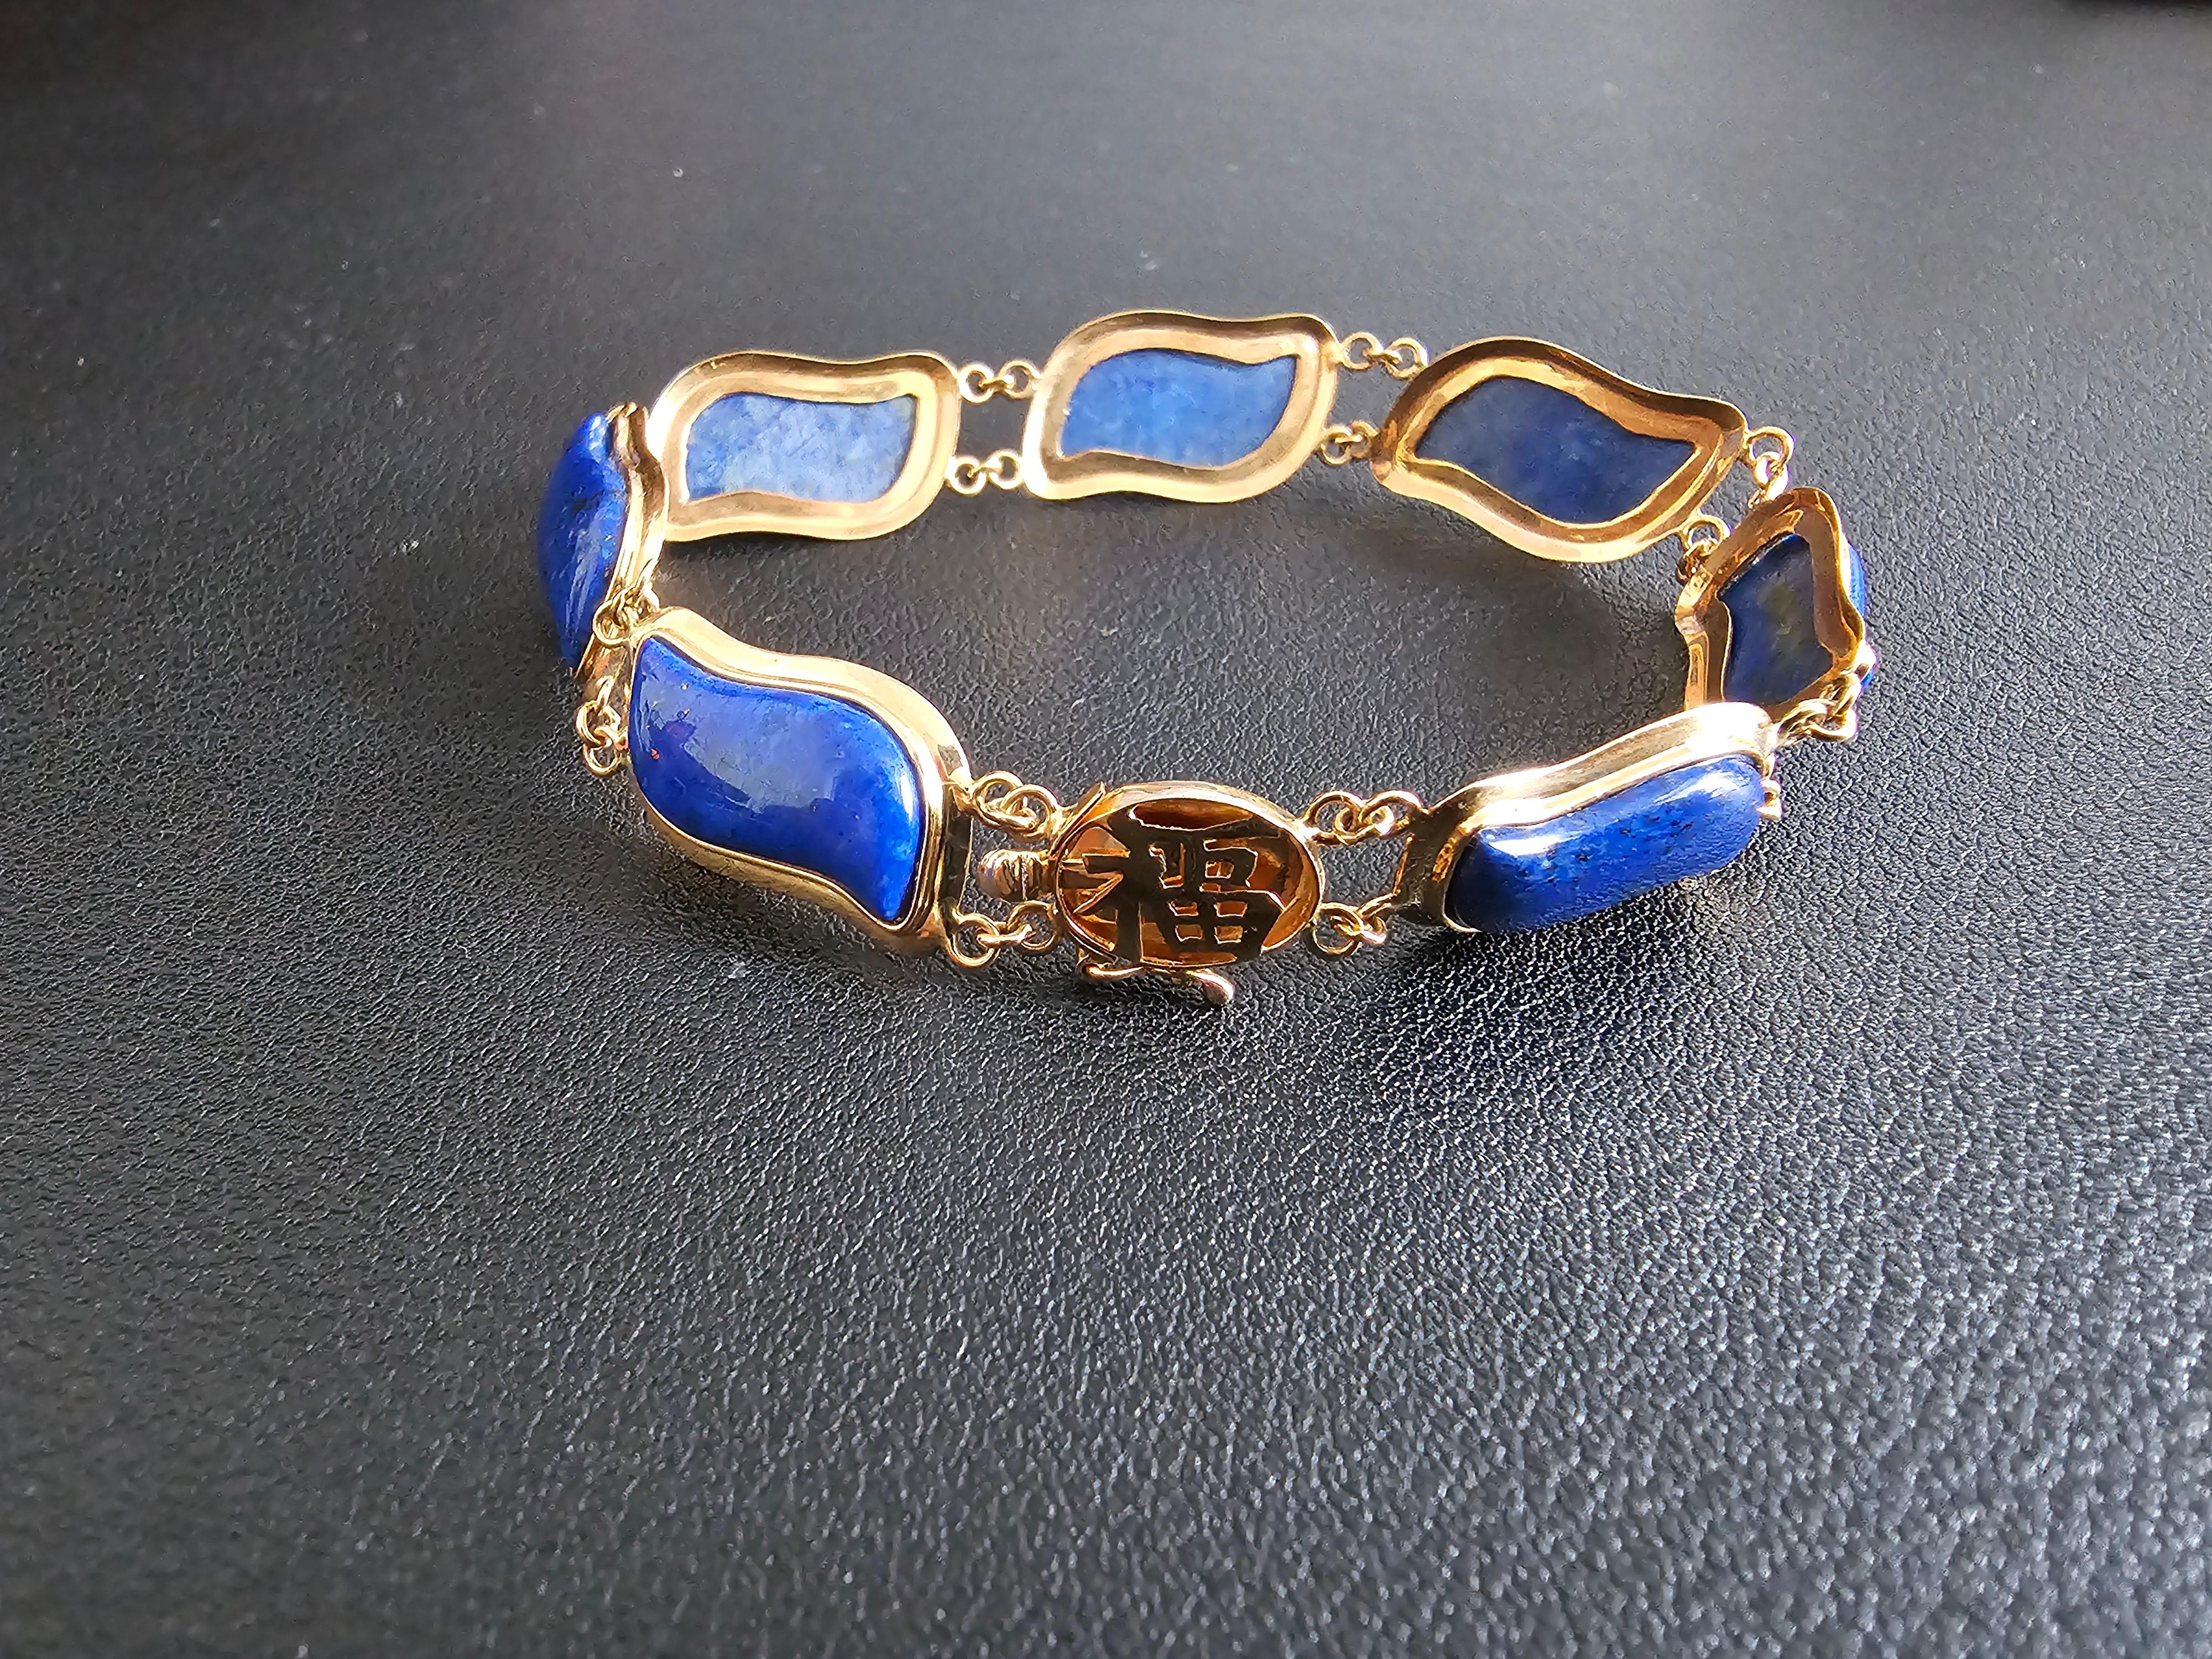 Sugarloaf Cabochon Blue Lapis Lazuli Bracelet Aurora Double Chained with 14K Solid Yellow Gold For Sale